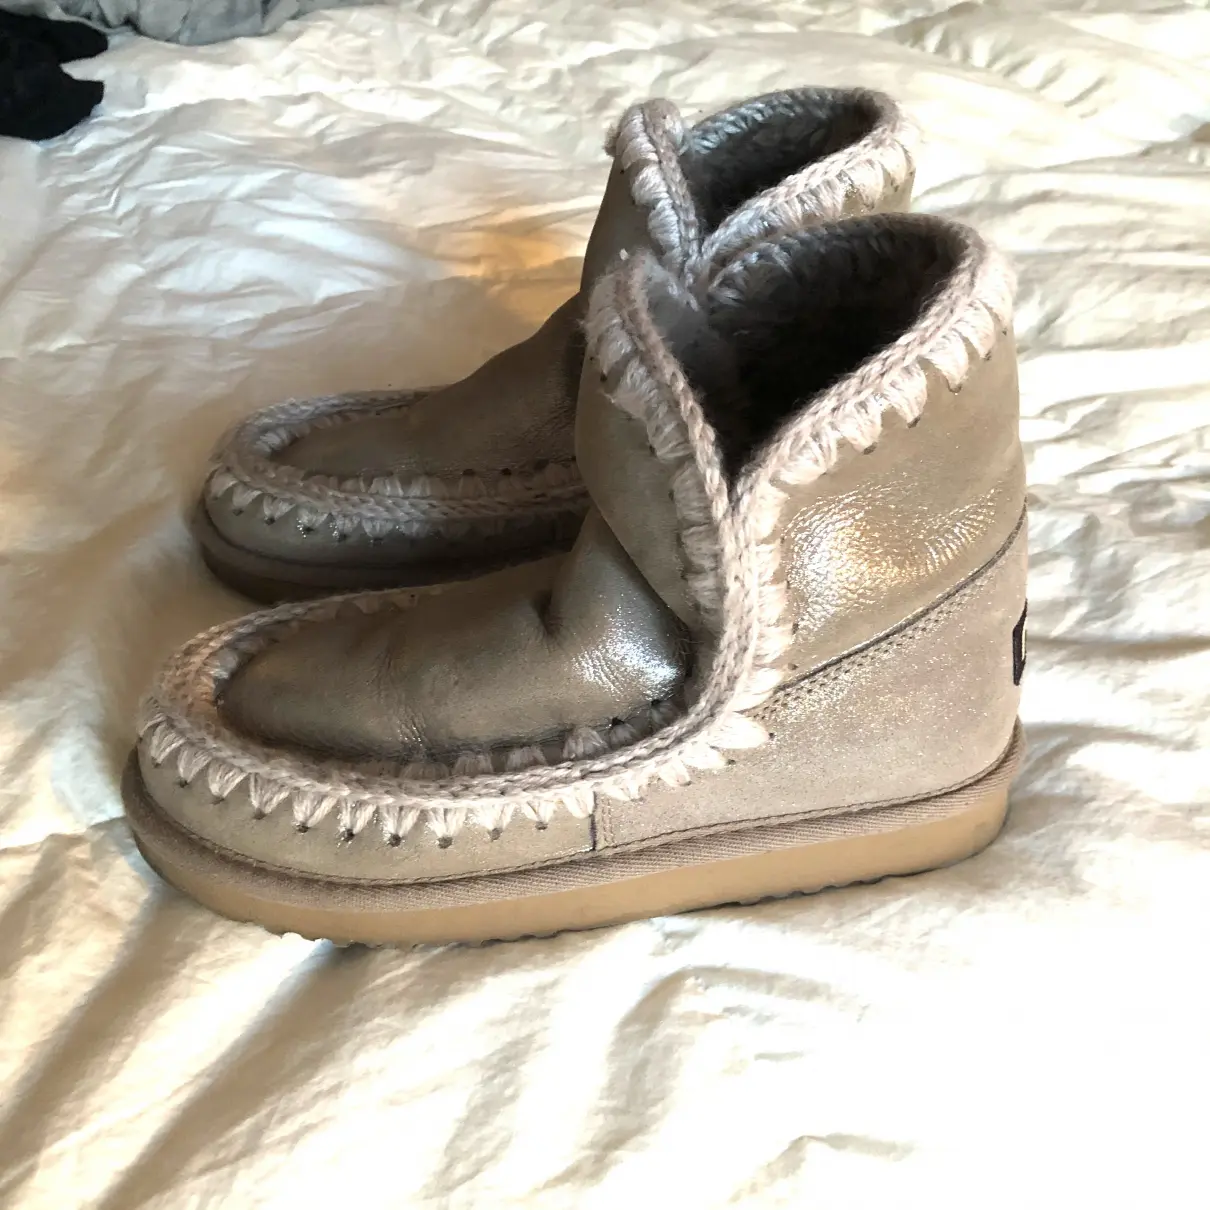 Buy Mou Snow boots online